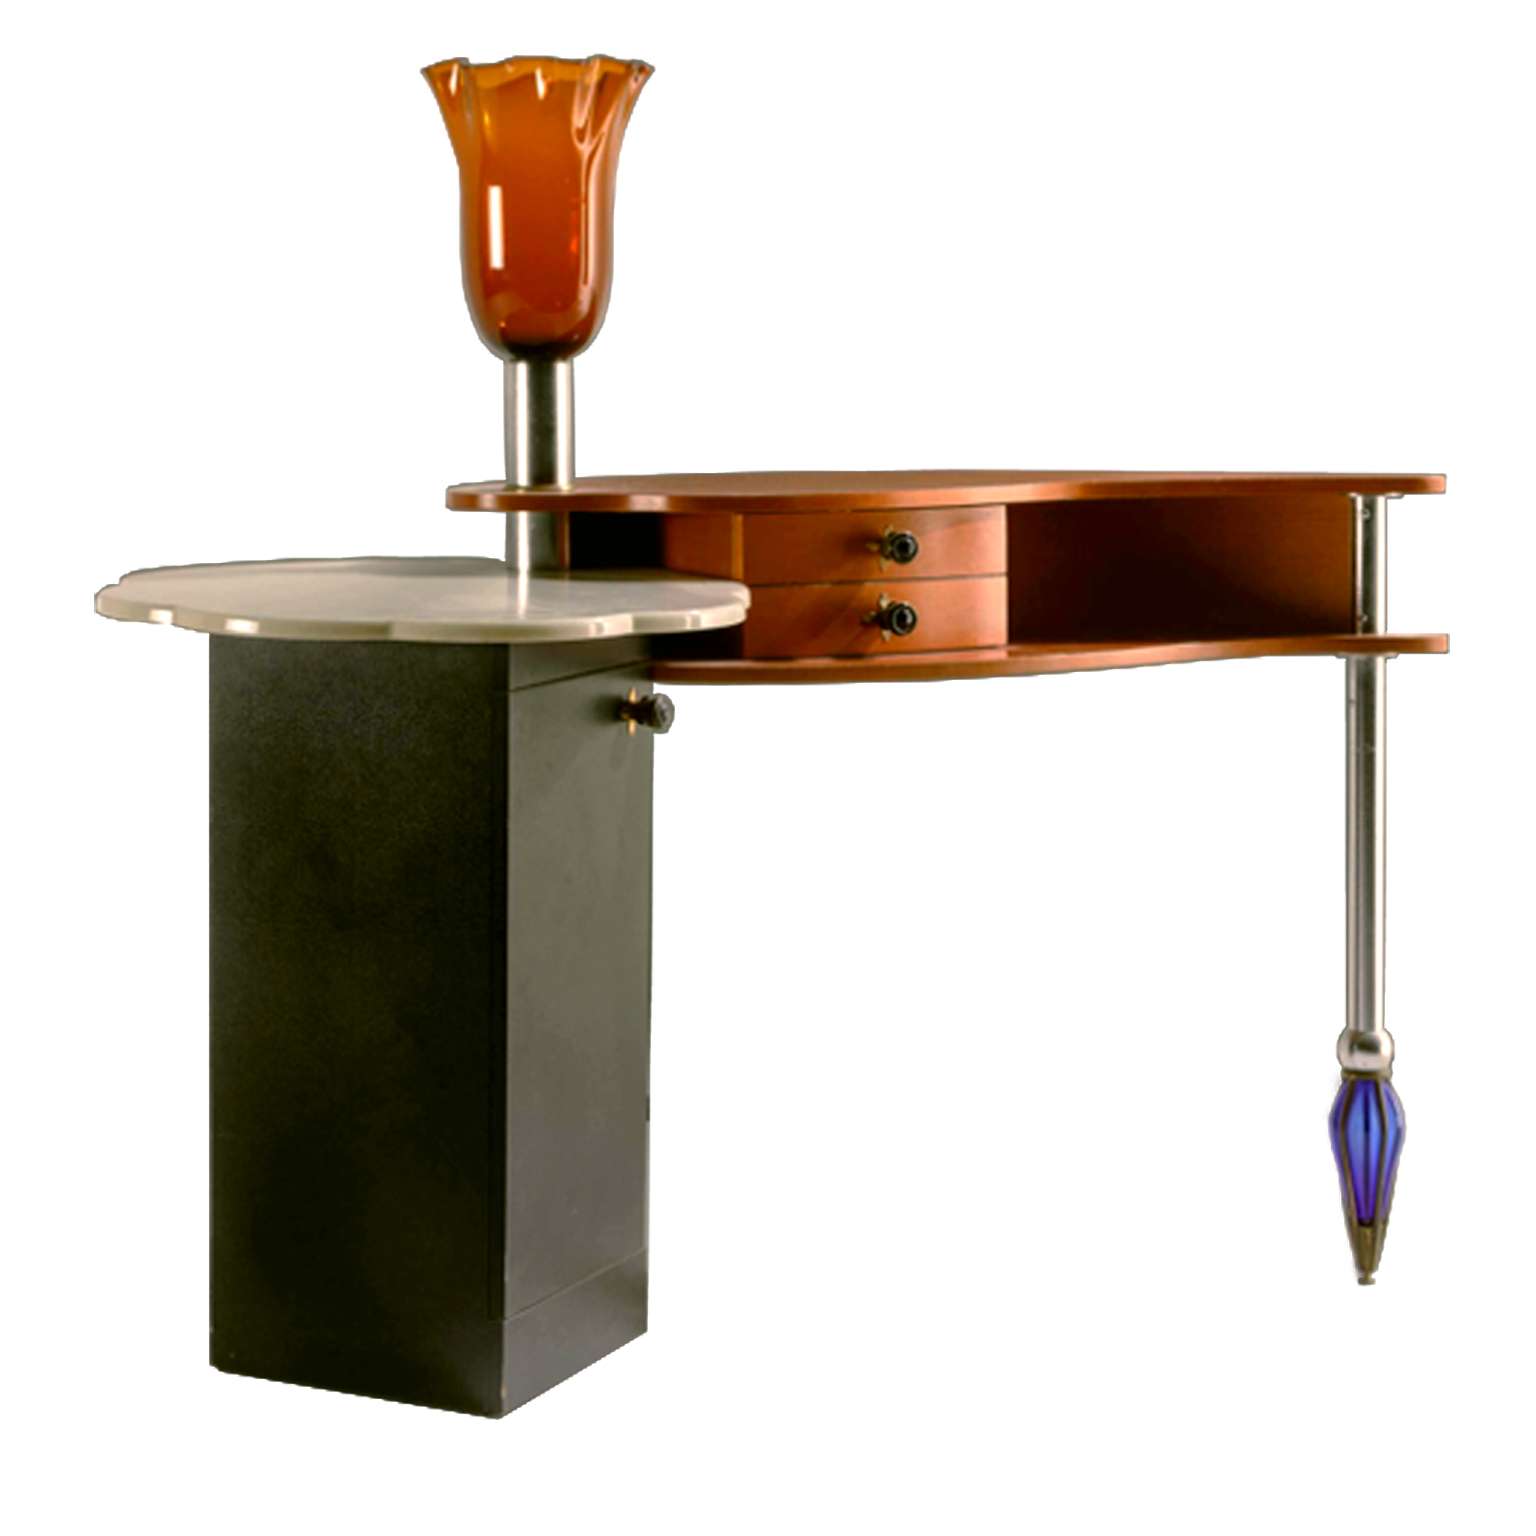 Italian Vanity Desk with built in Hand Blown Glass Lamp and Glass Foot